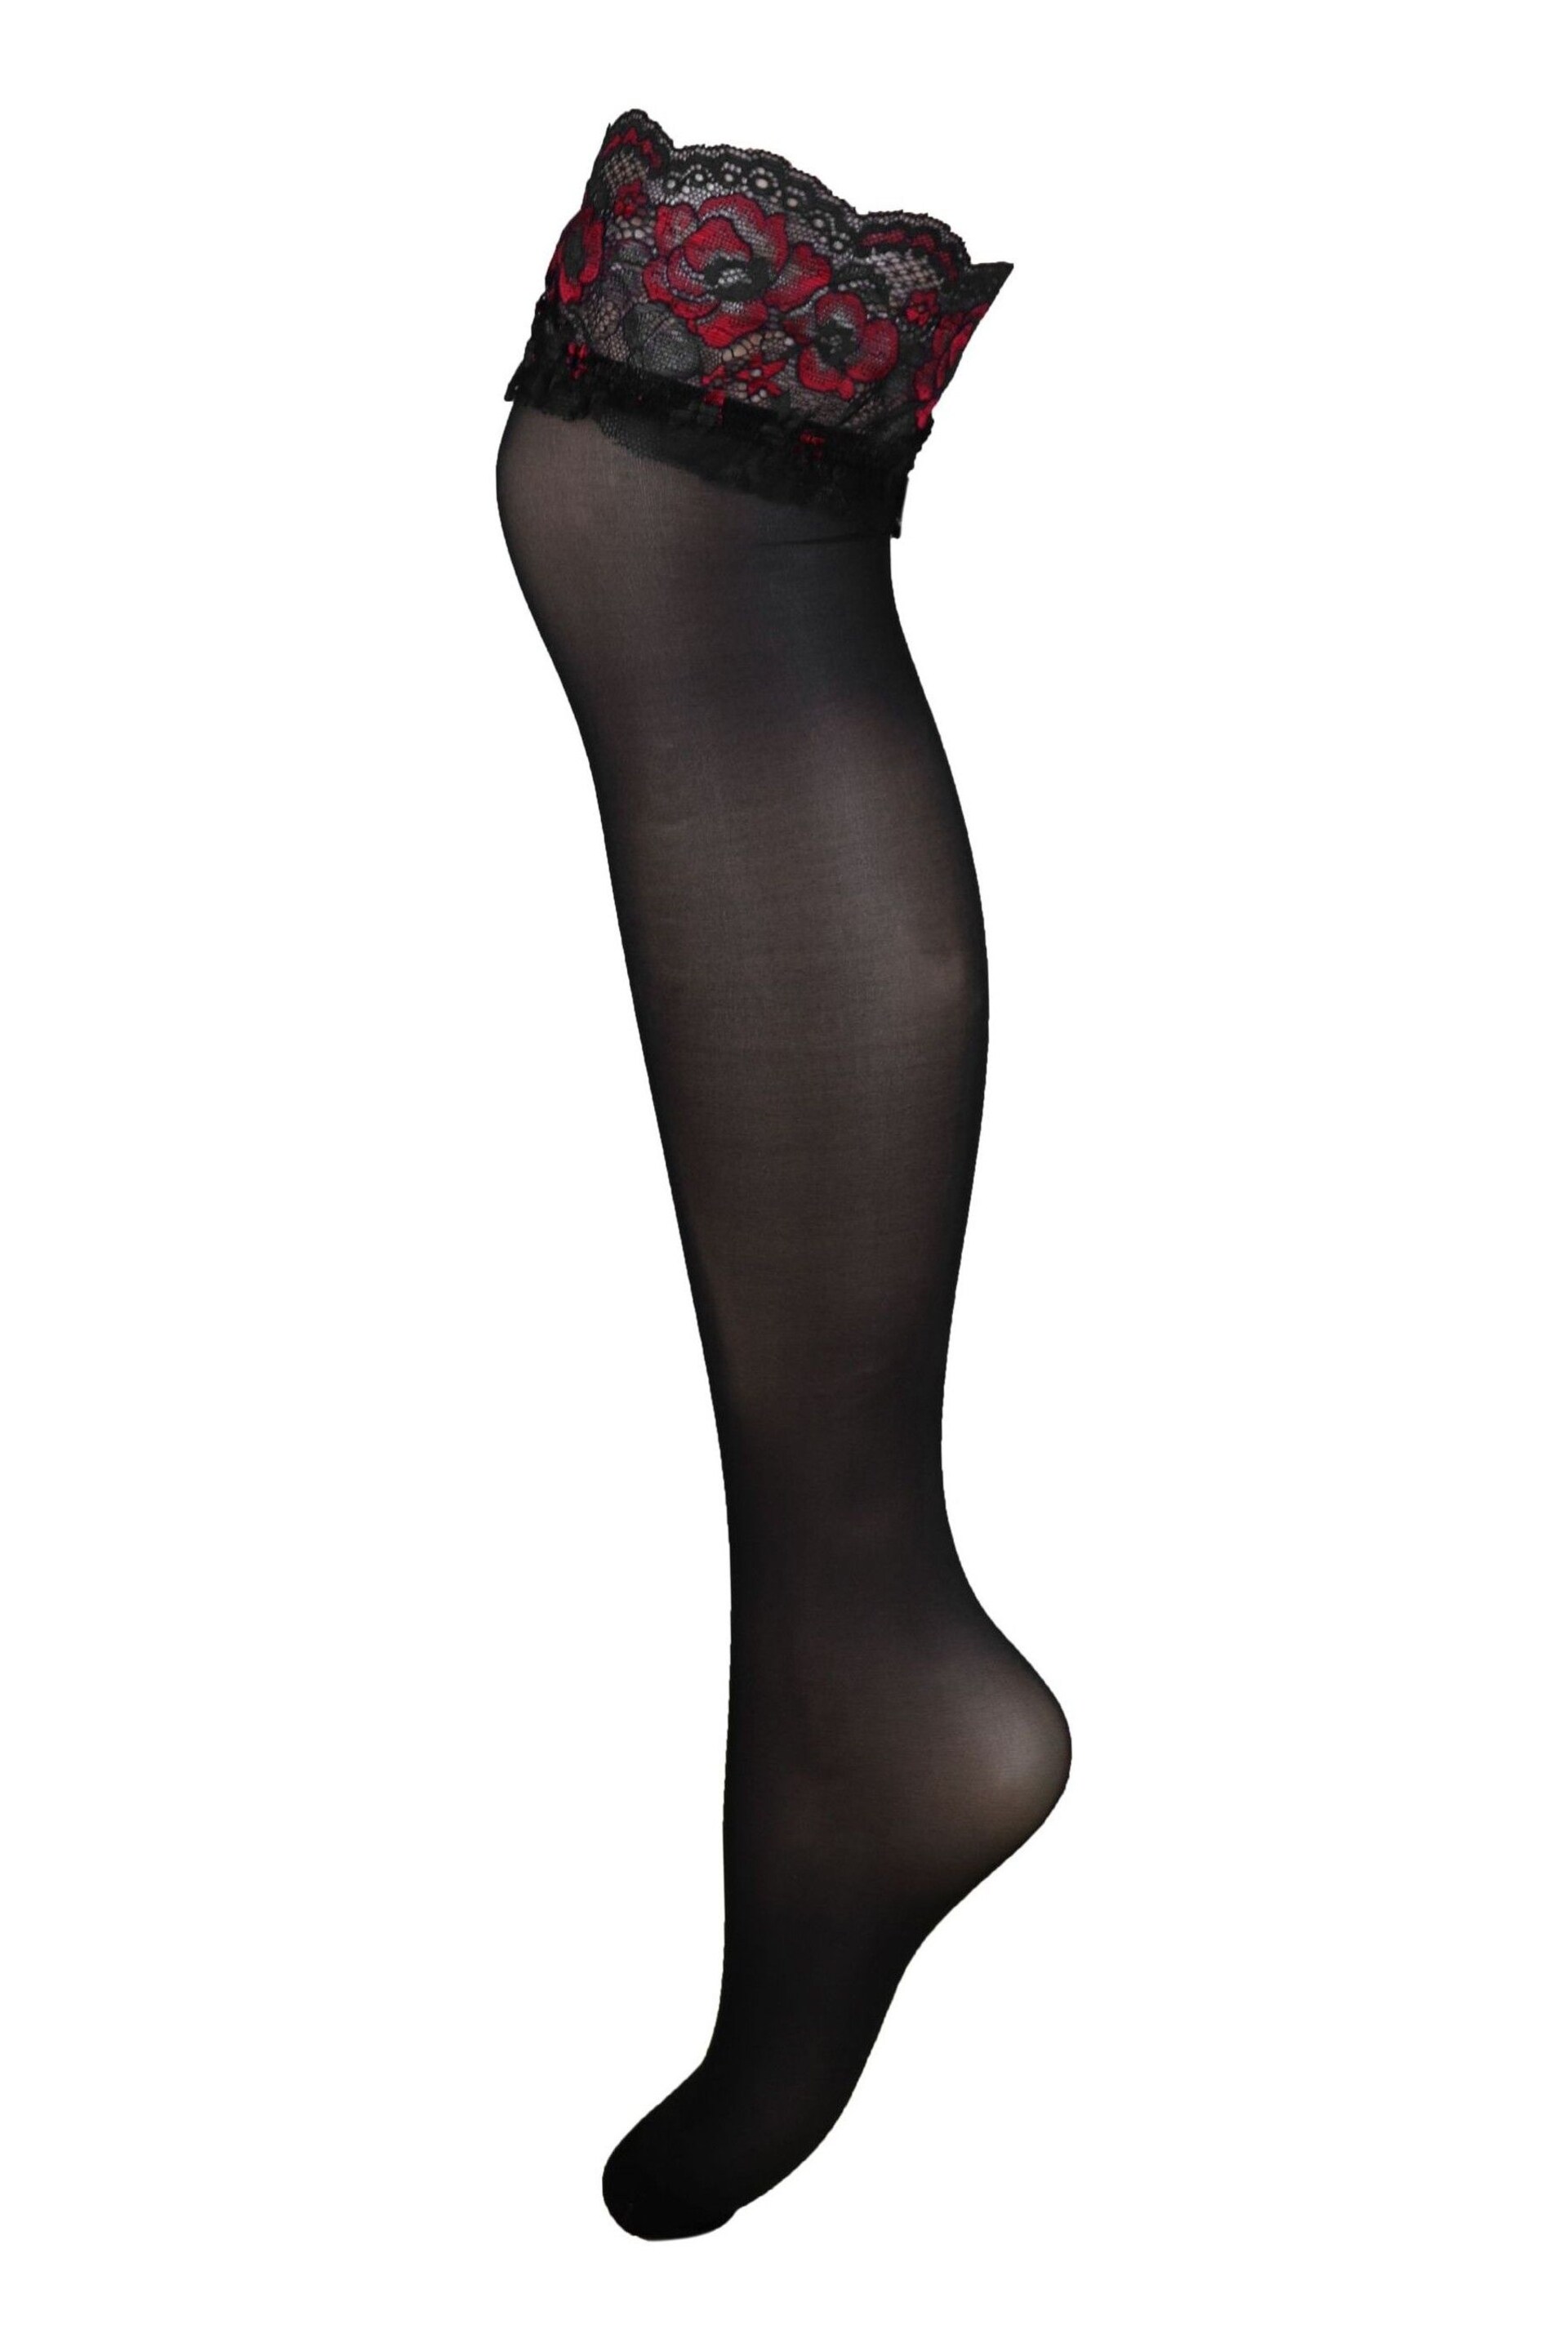 Pour Moi Black Scarlet Amour Hold-Ups - Image 3 of 3